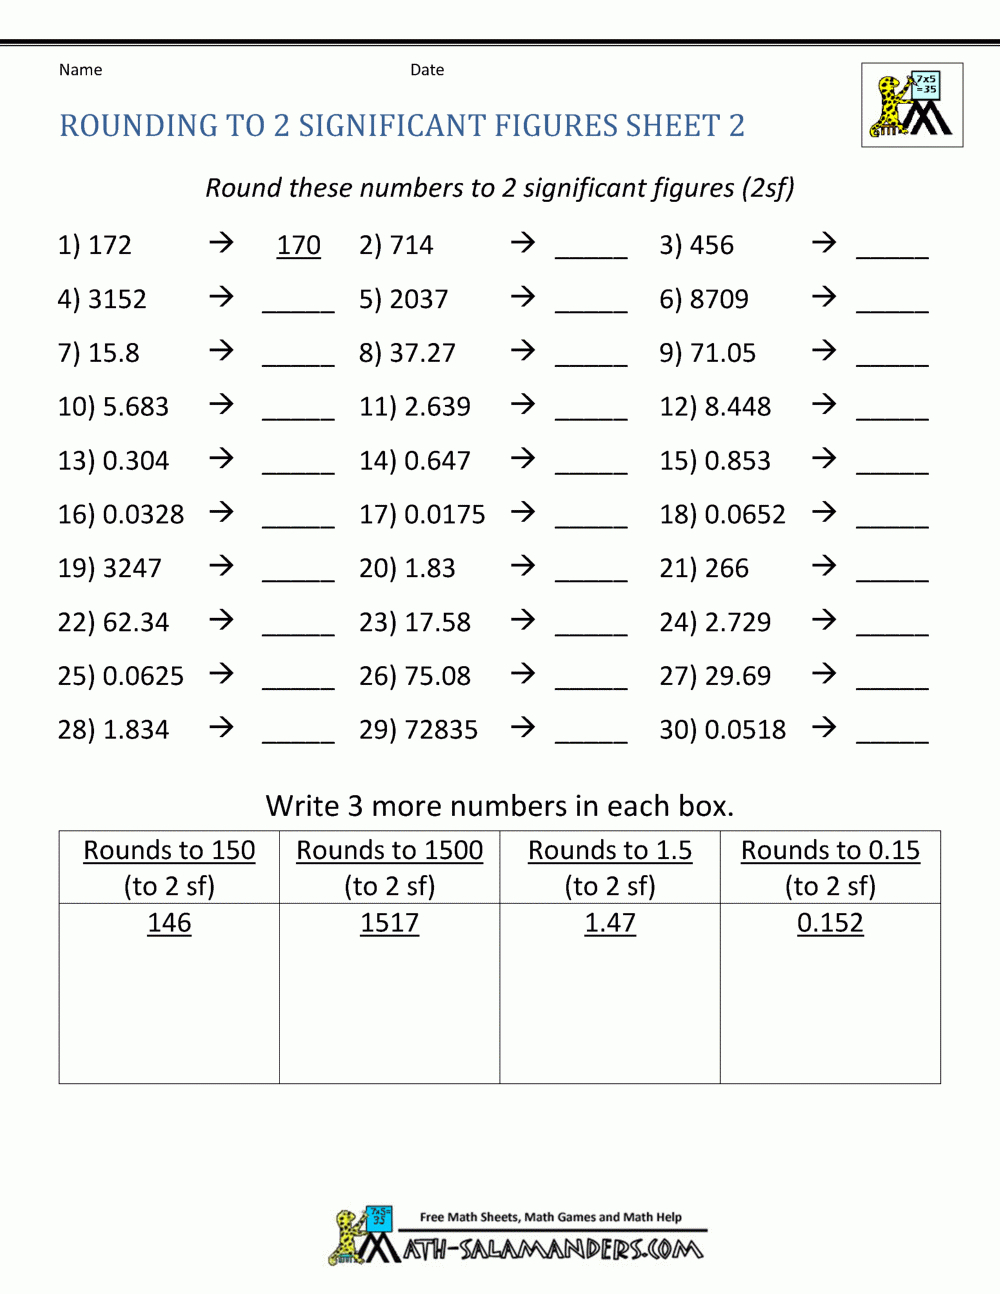 rounding-significant-figures-db-excel